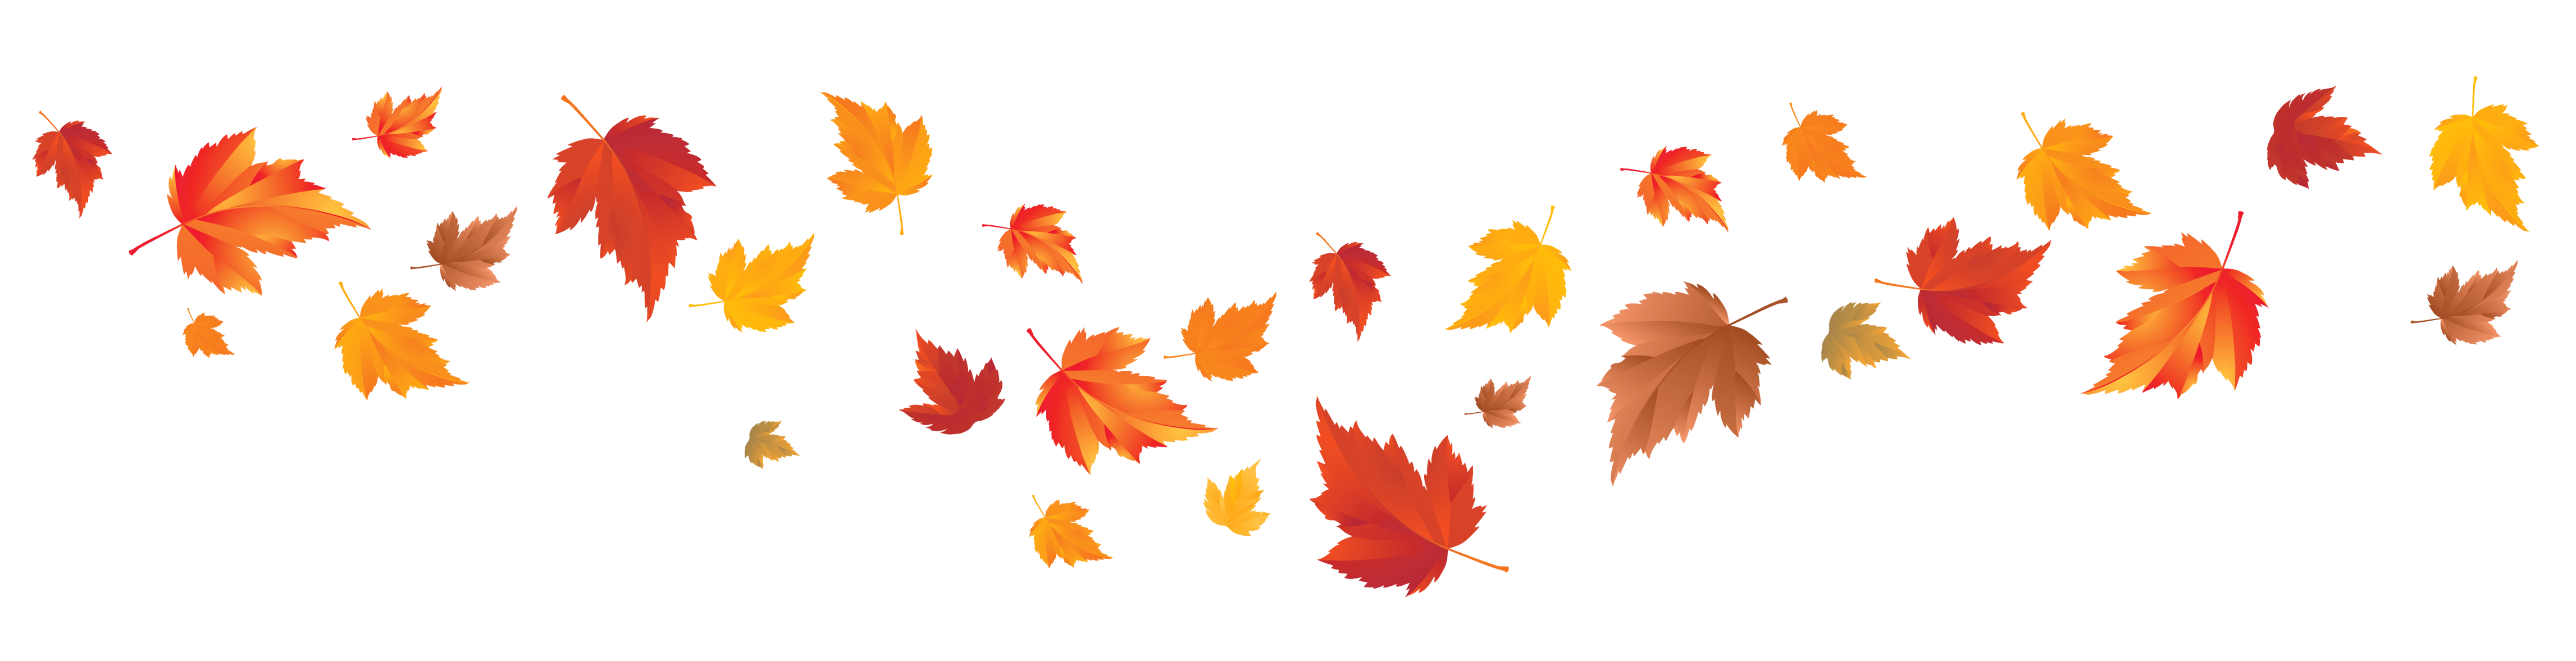 Maple Leaf Falling Download Free PNG